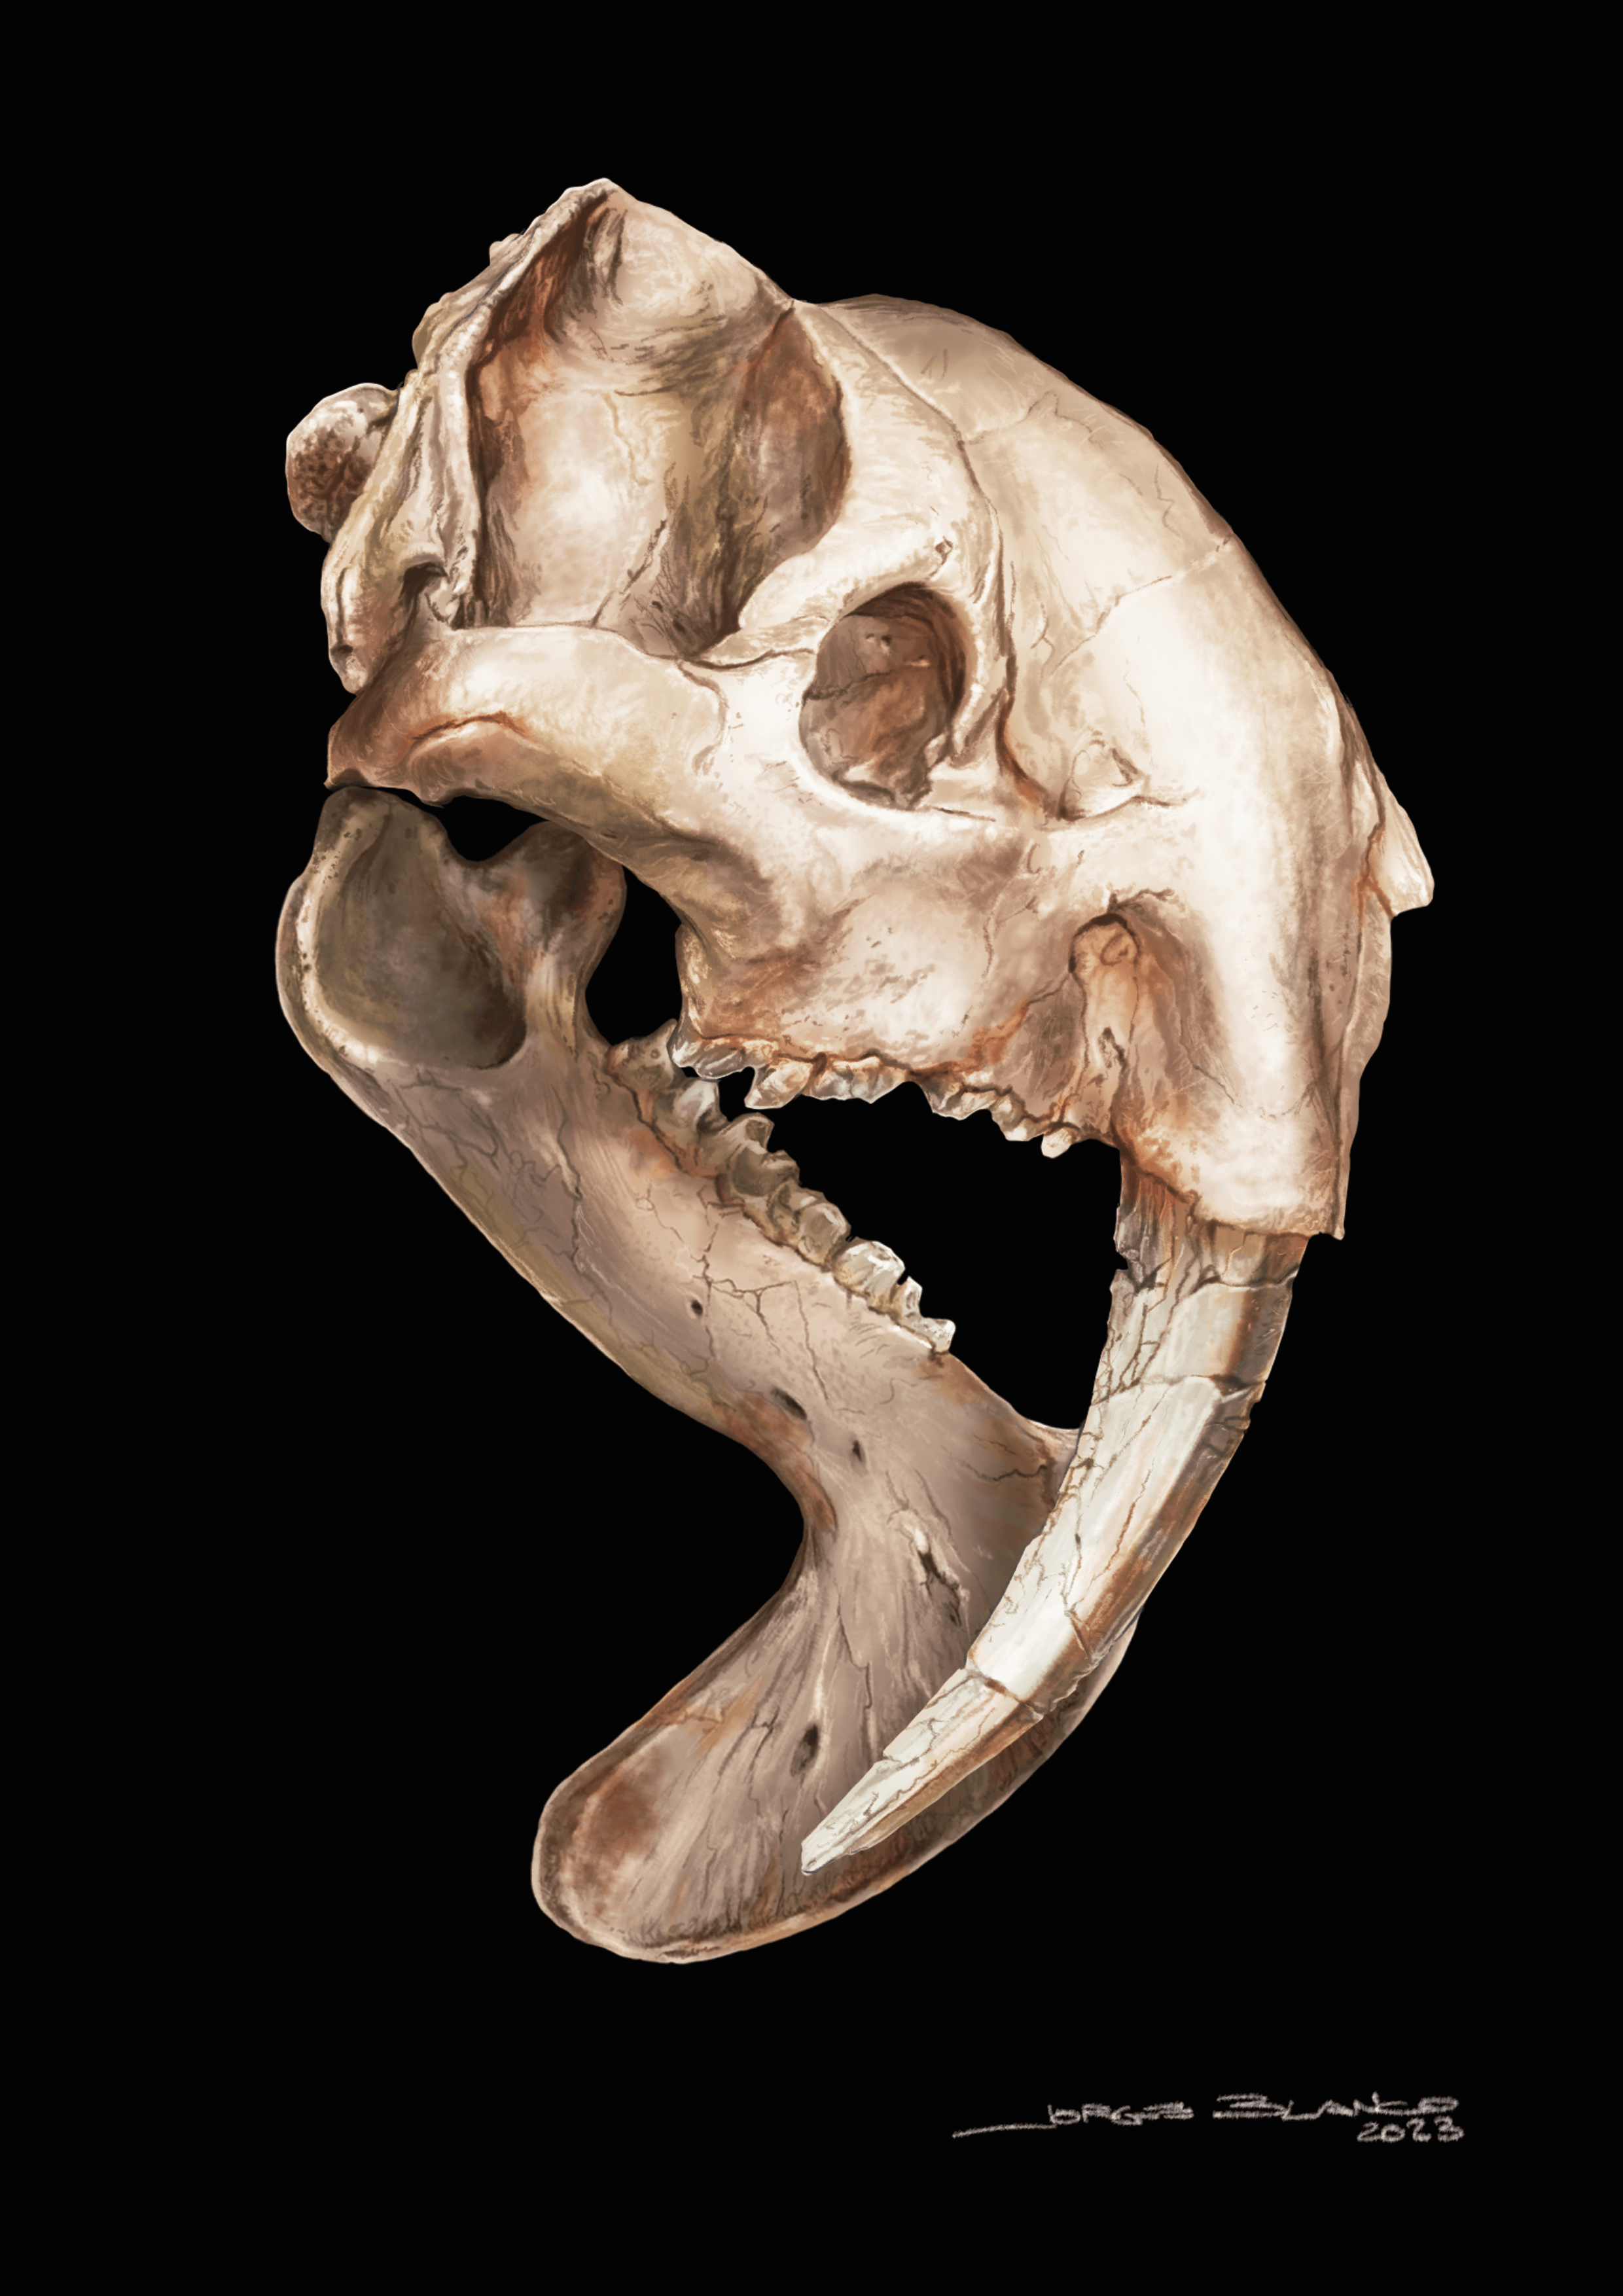 Saber-Toothed Marsupial Predator Compensated for Its Teeth With Cow Eyes